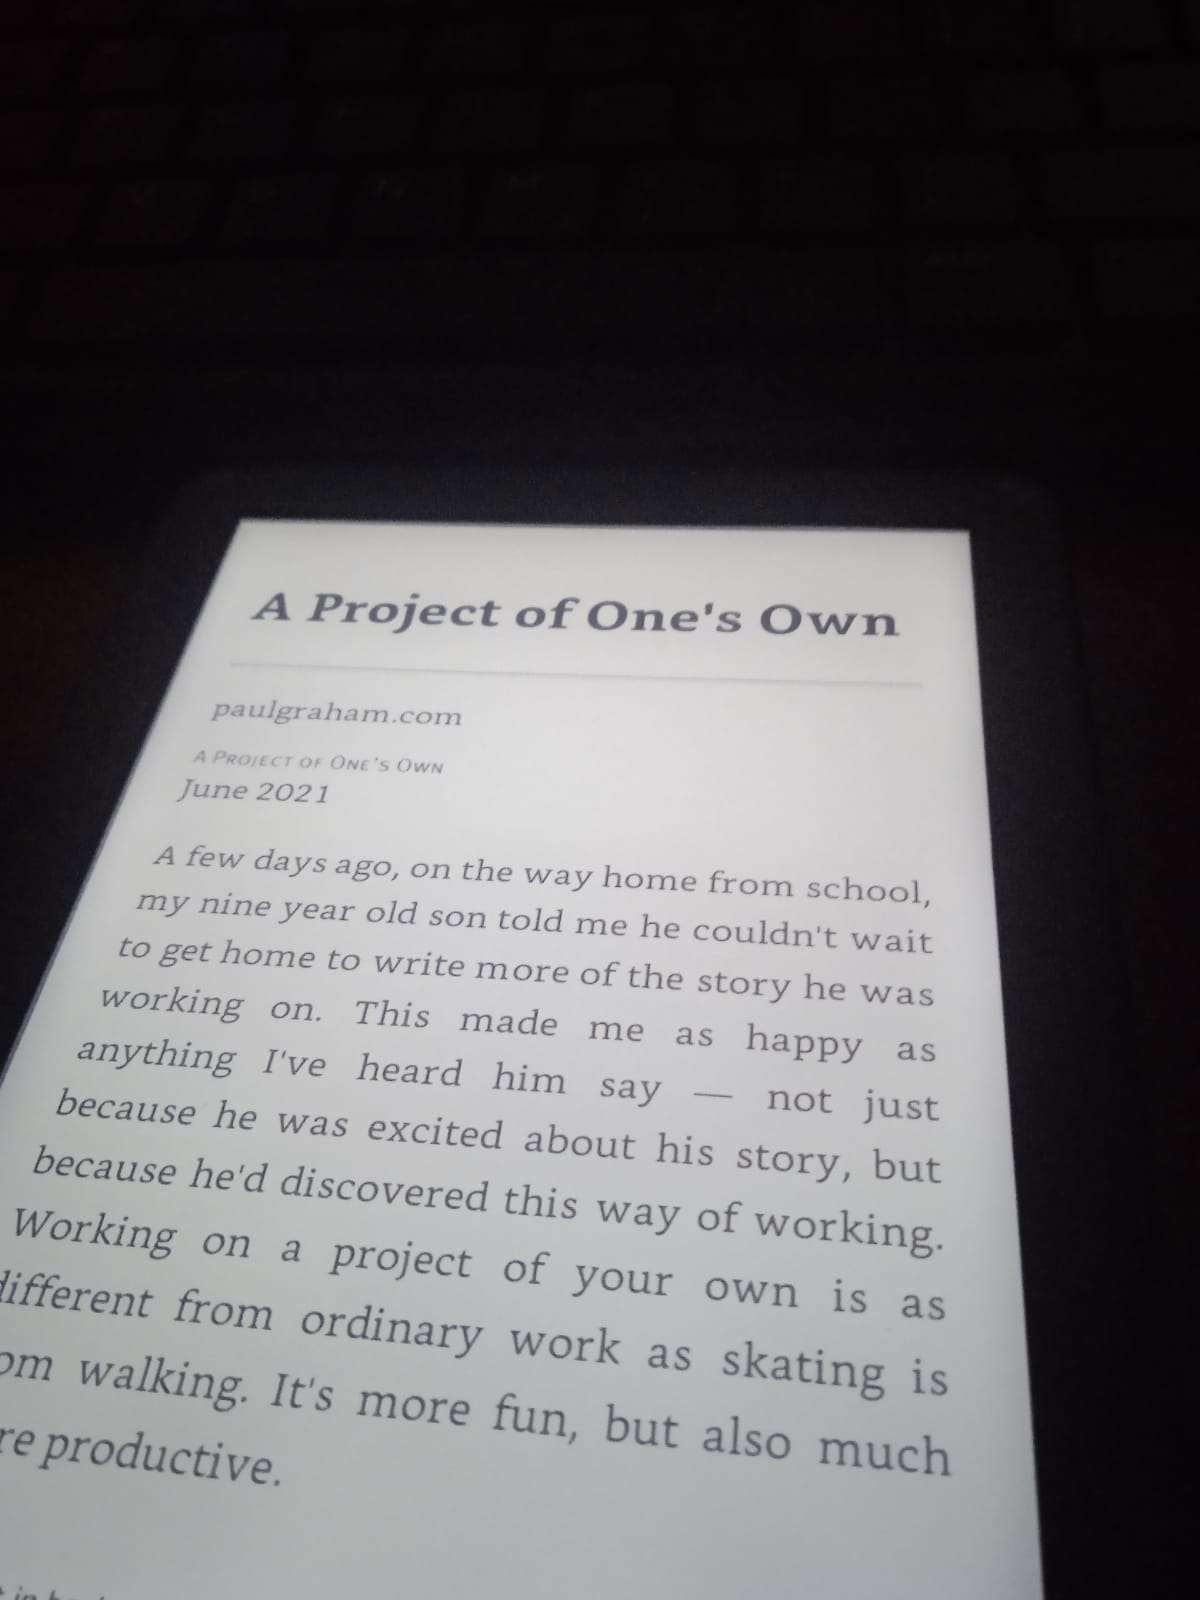 Reading articles from the web on my Kindle